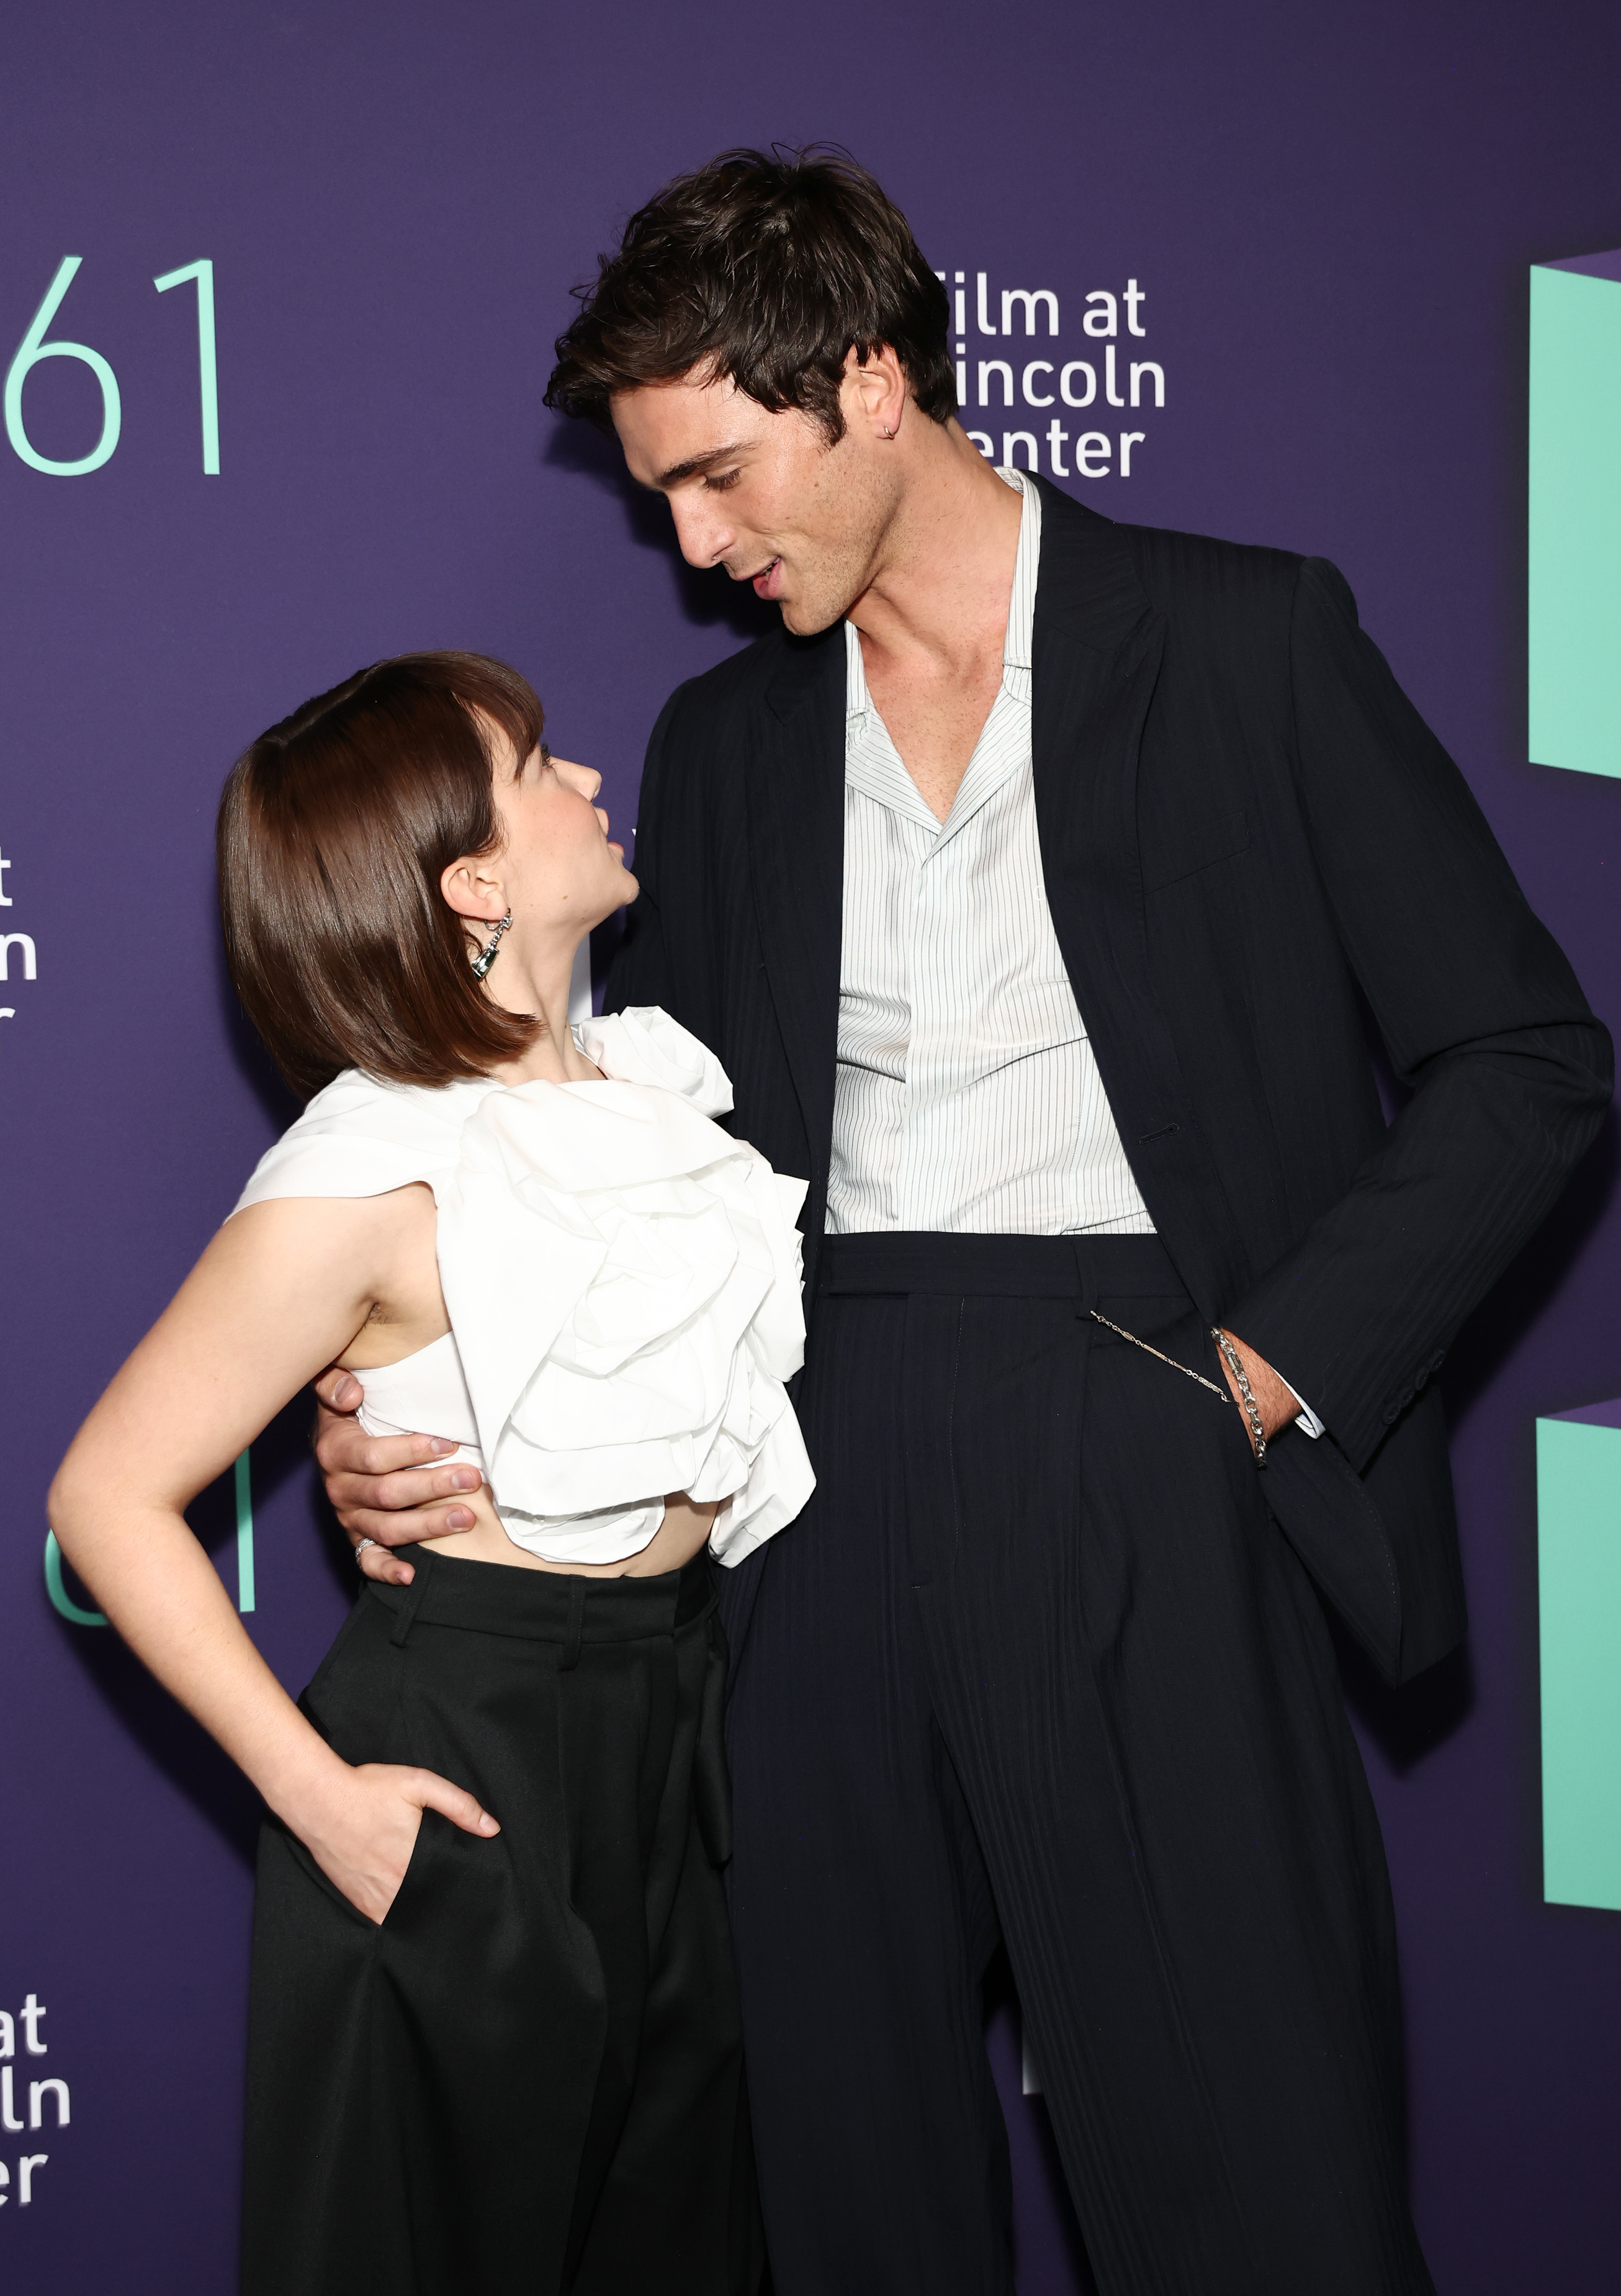 Jacob and Cailee dressed in white and black on the red carpet